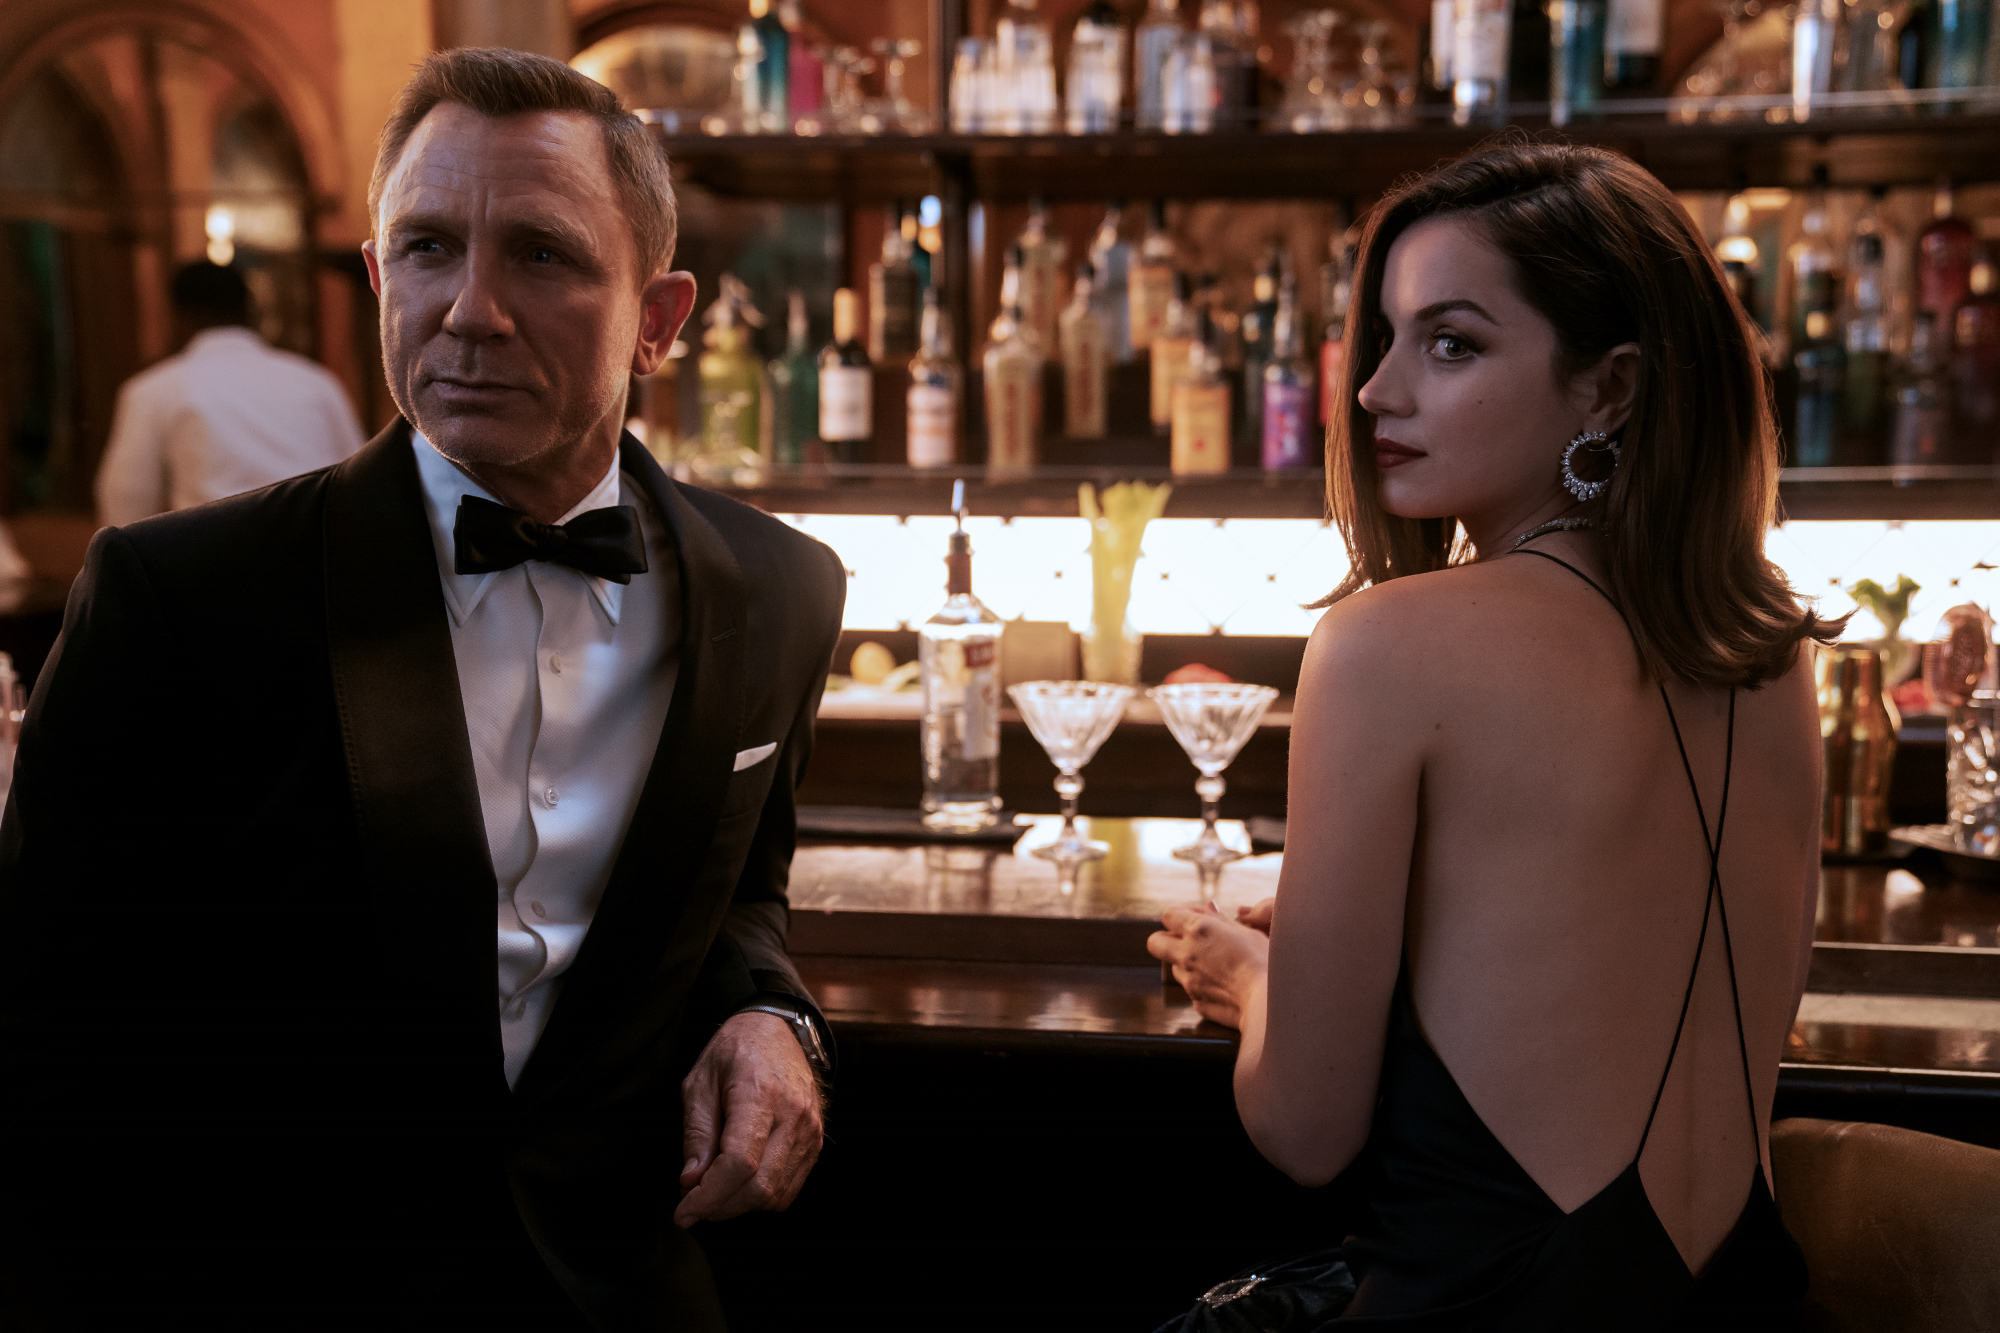 'No Time to Die' Imax movie stars Daniel Craig as James Bond and Ana de Armas as Paloma dressed in a suit and dress at the bar